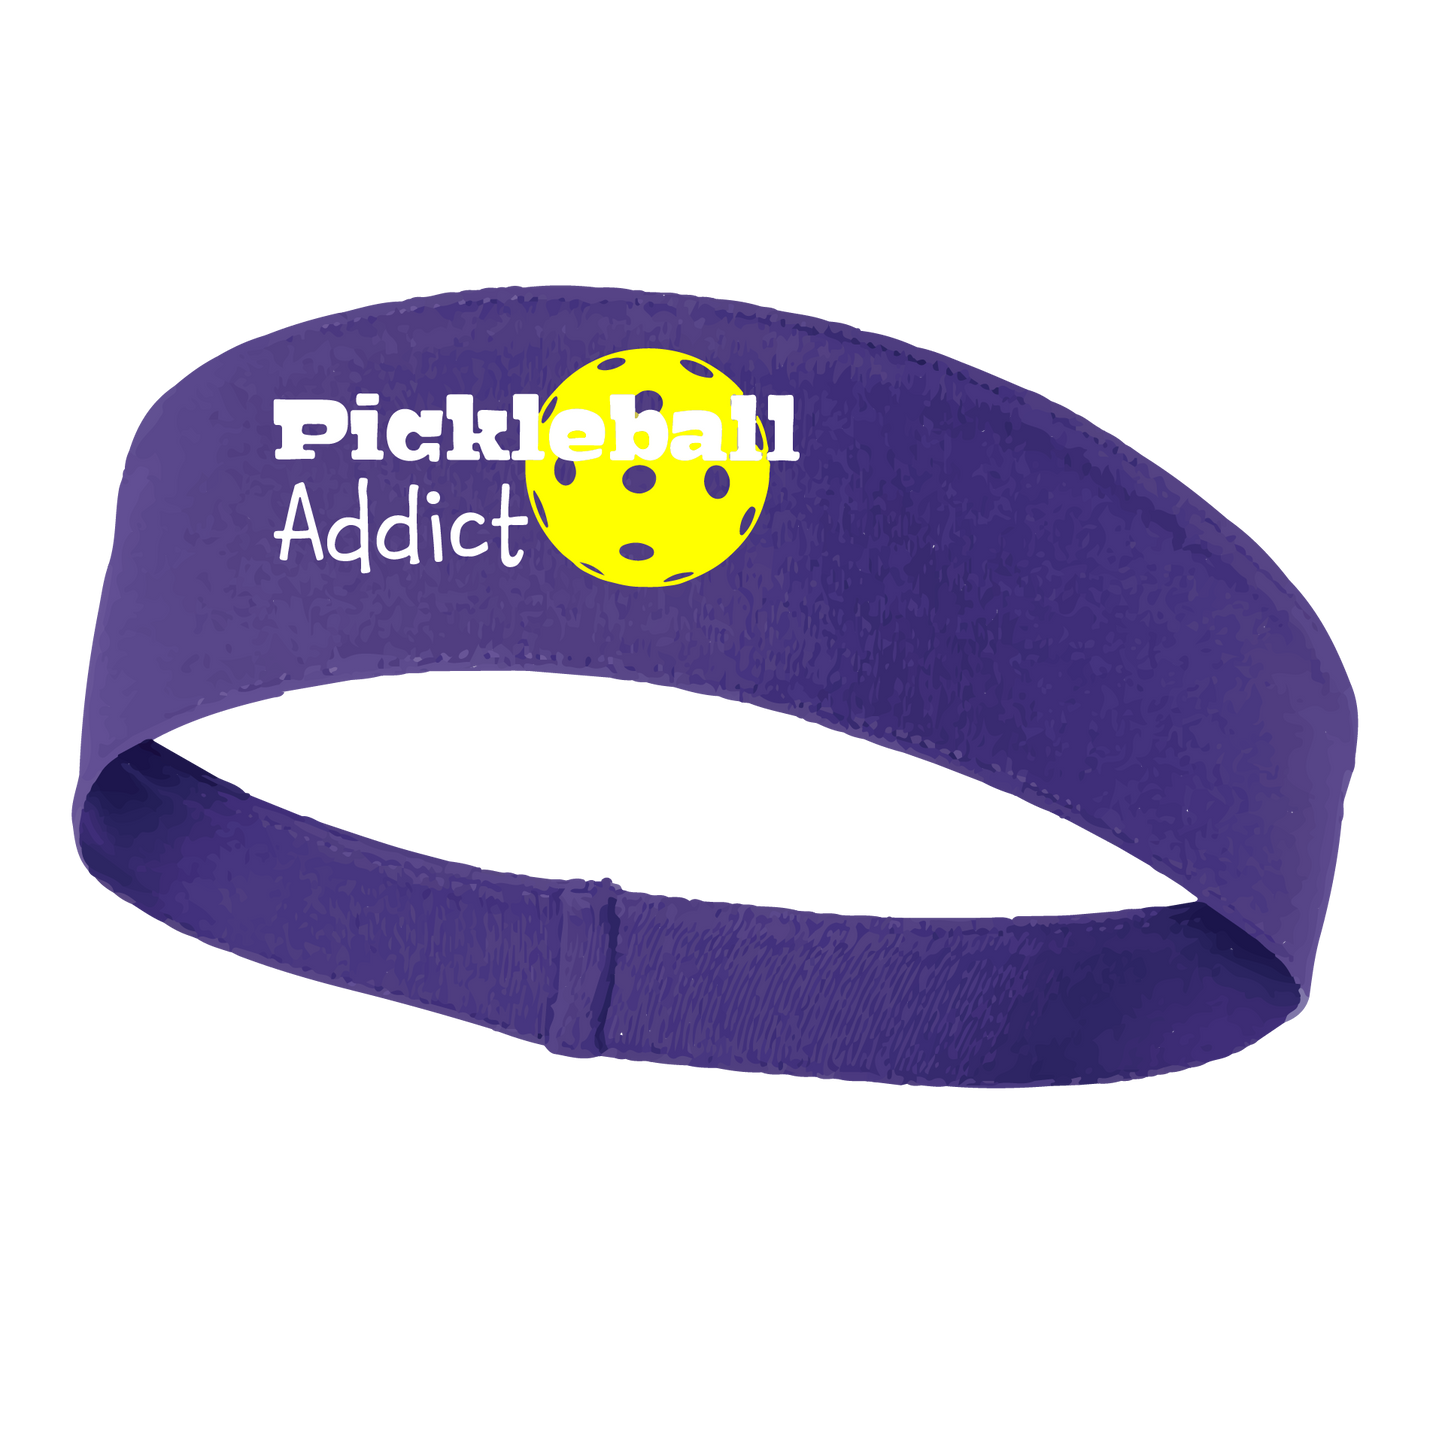 Pickleball Headband Design: Pickleball Addict  This fun, pickleball designed, moisture-wicking headband narrows in the back to fit more securely. Single-needle top-stitched edging. These headbands come in a variety of colors. Truly shows your love for the sport of pickleball!!